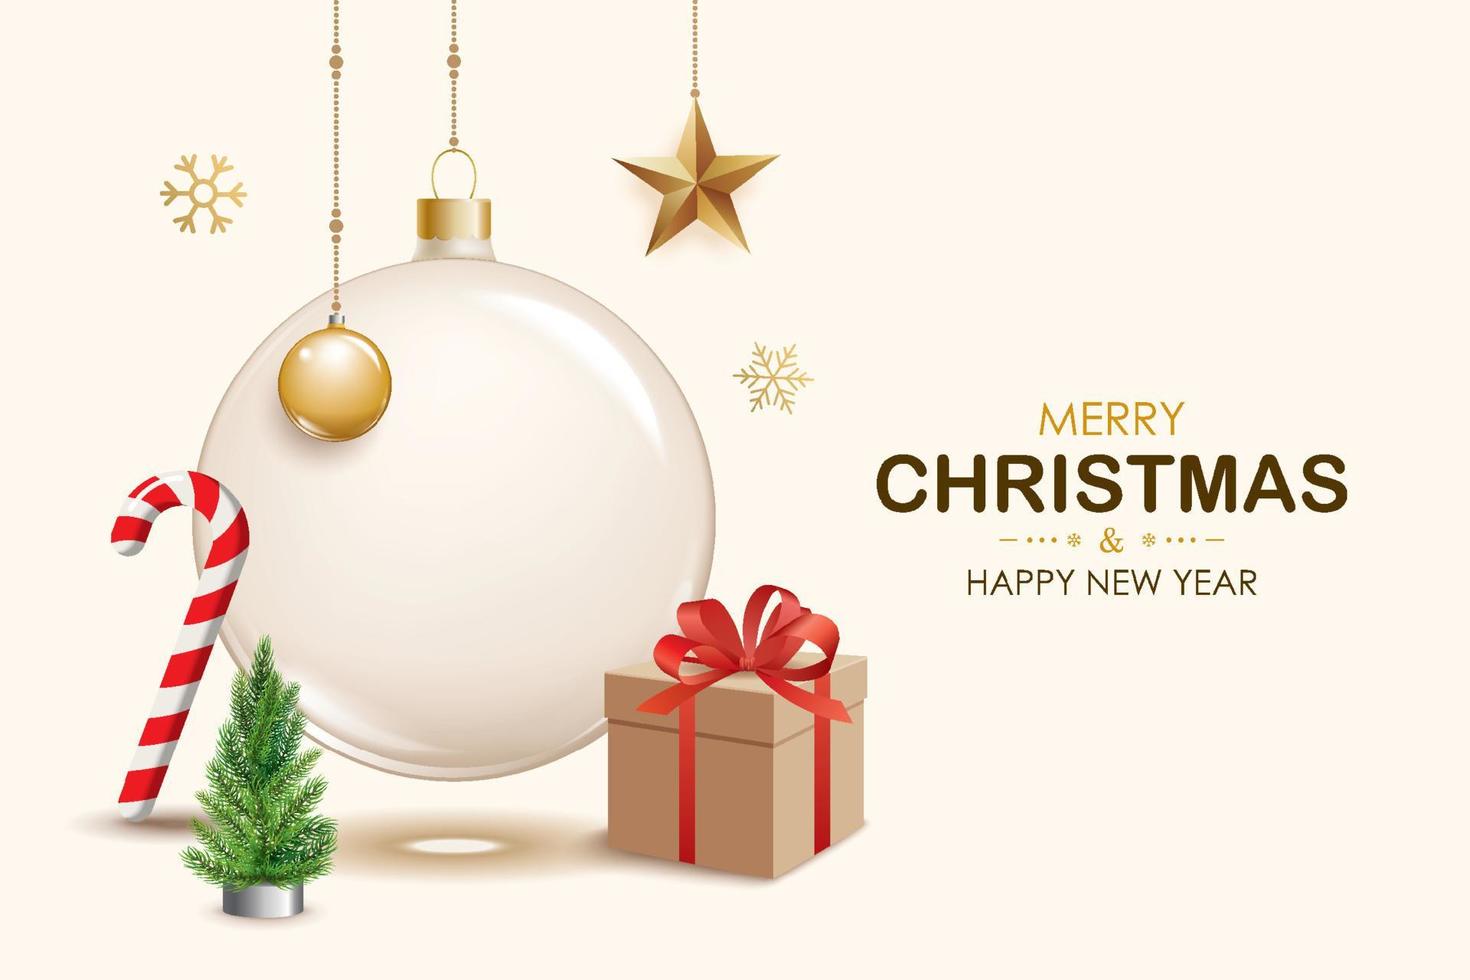 Merry christmas glass ball and decoration object for flyer brochure design on white background invitation theme concept. Happy holiday greeting banner and card template. vector